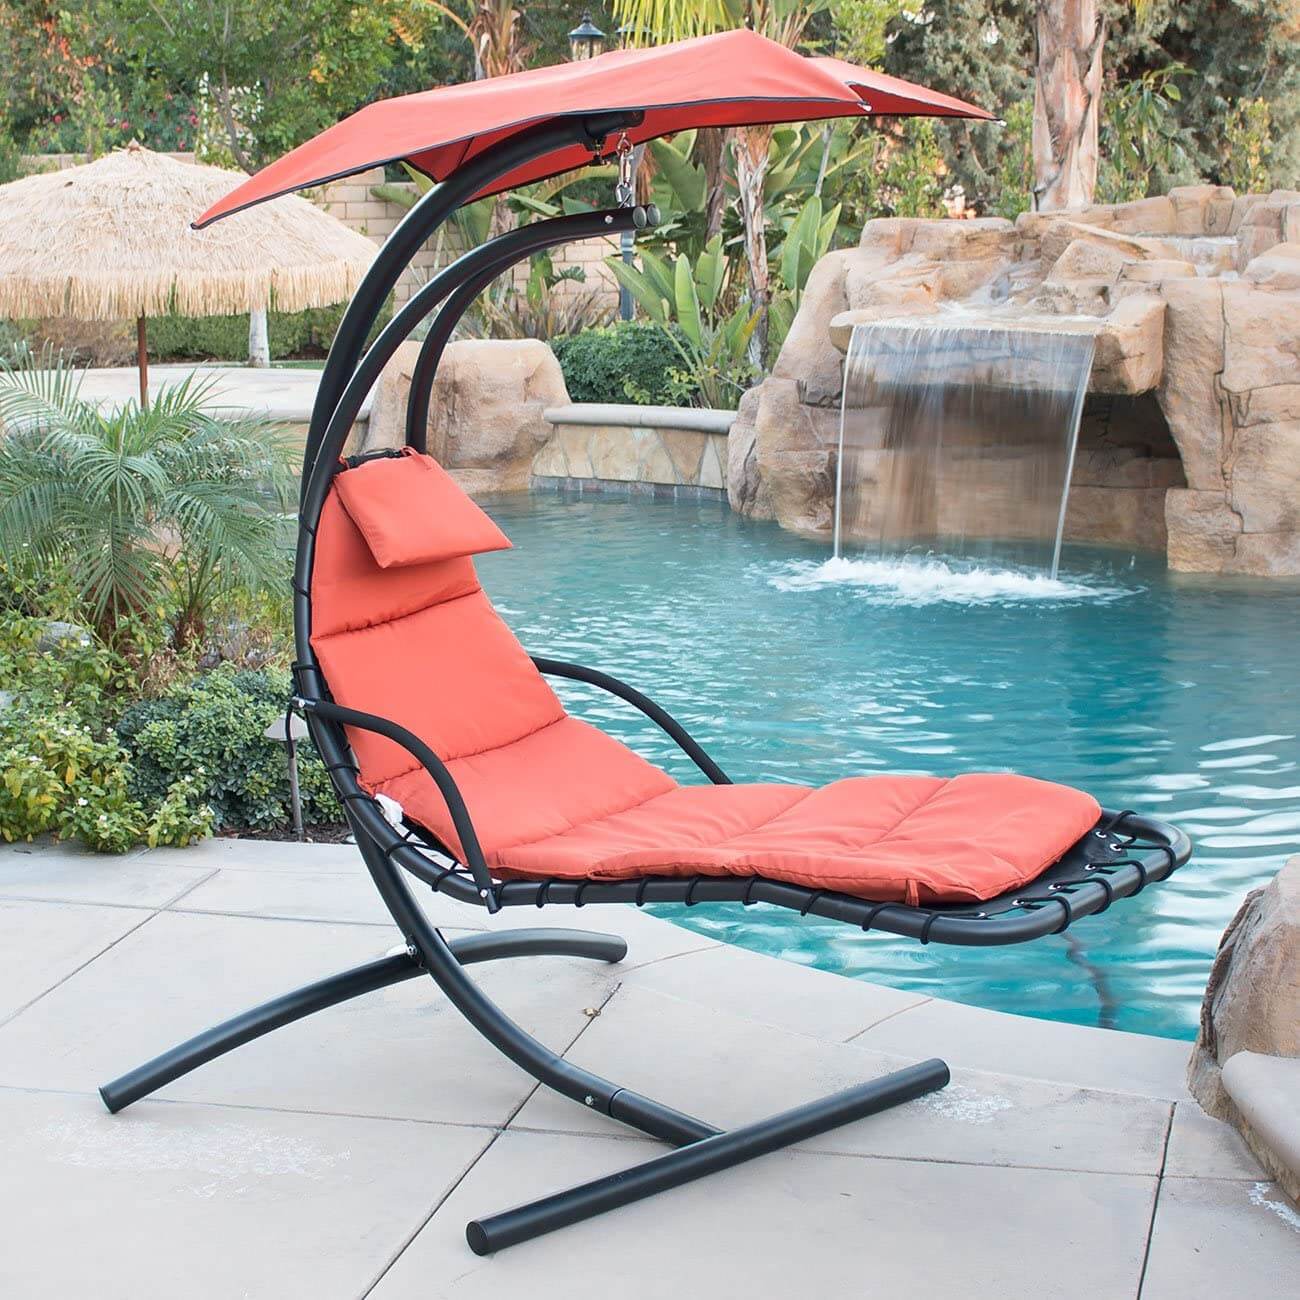 Best Hanging Chaise Loungers Reviews: Buying Guide & Customer Report